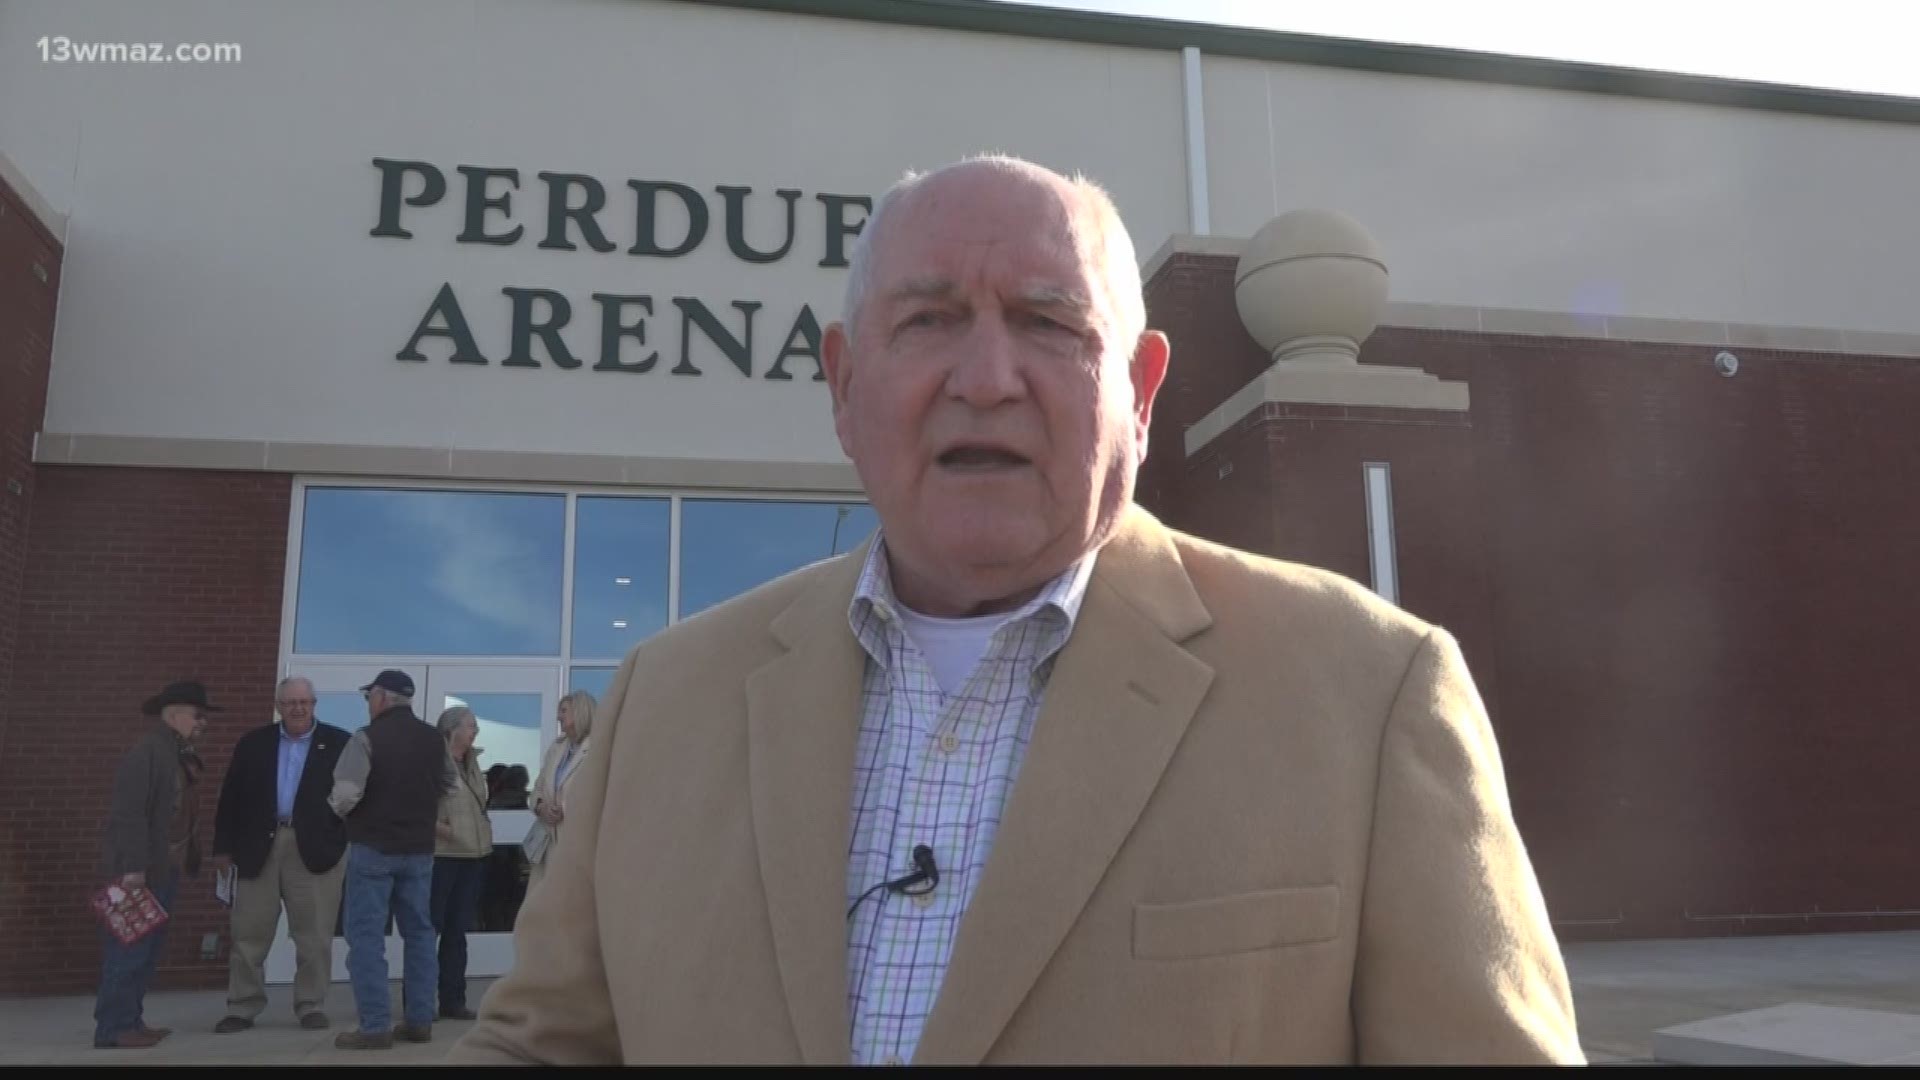 Saturday afternoon, friends and family of Sonny Perdue gathered at the Georgia National Fairgrounds in Perry for a special ribbon cutting.